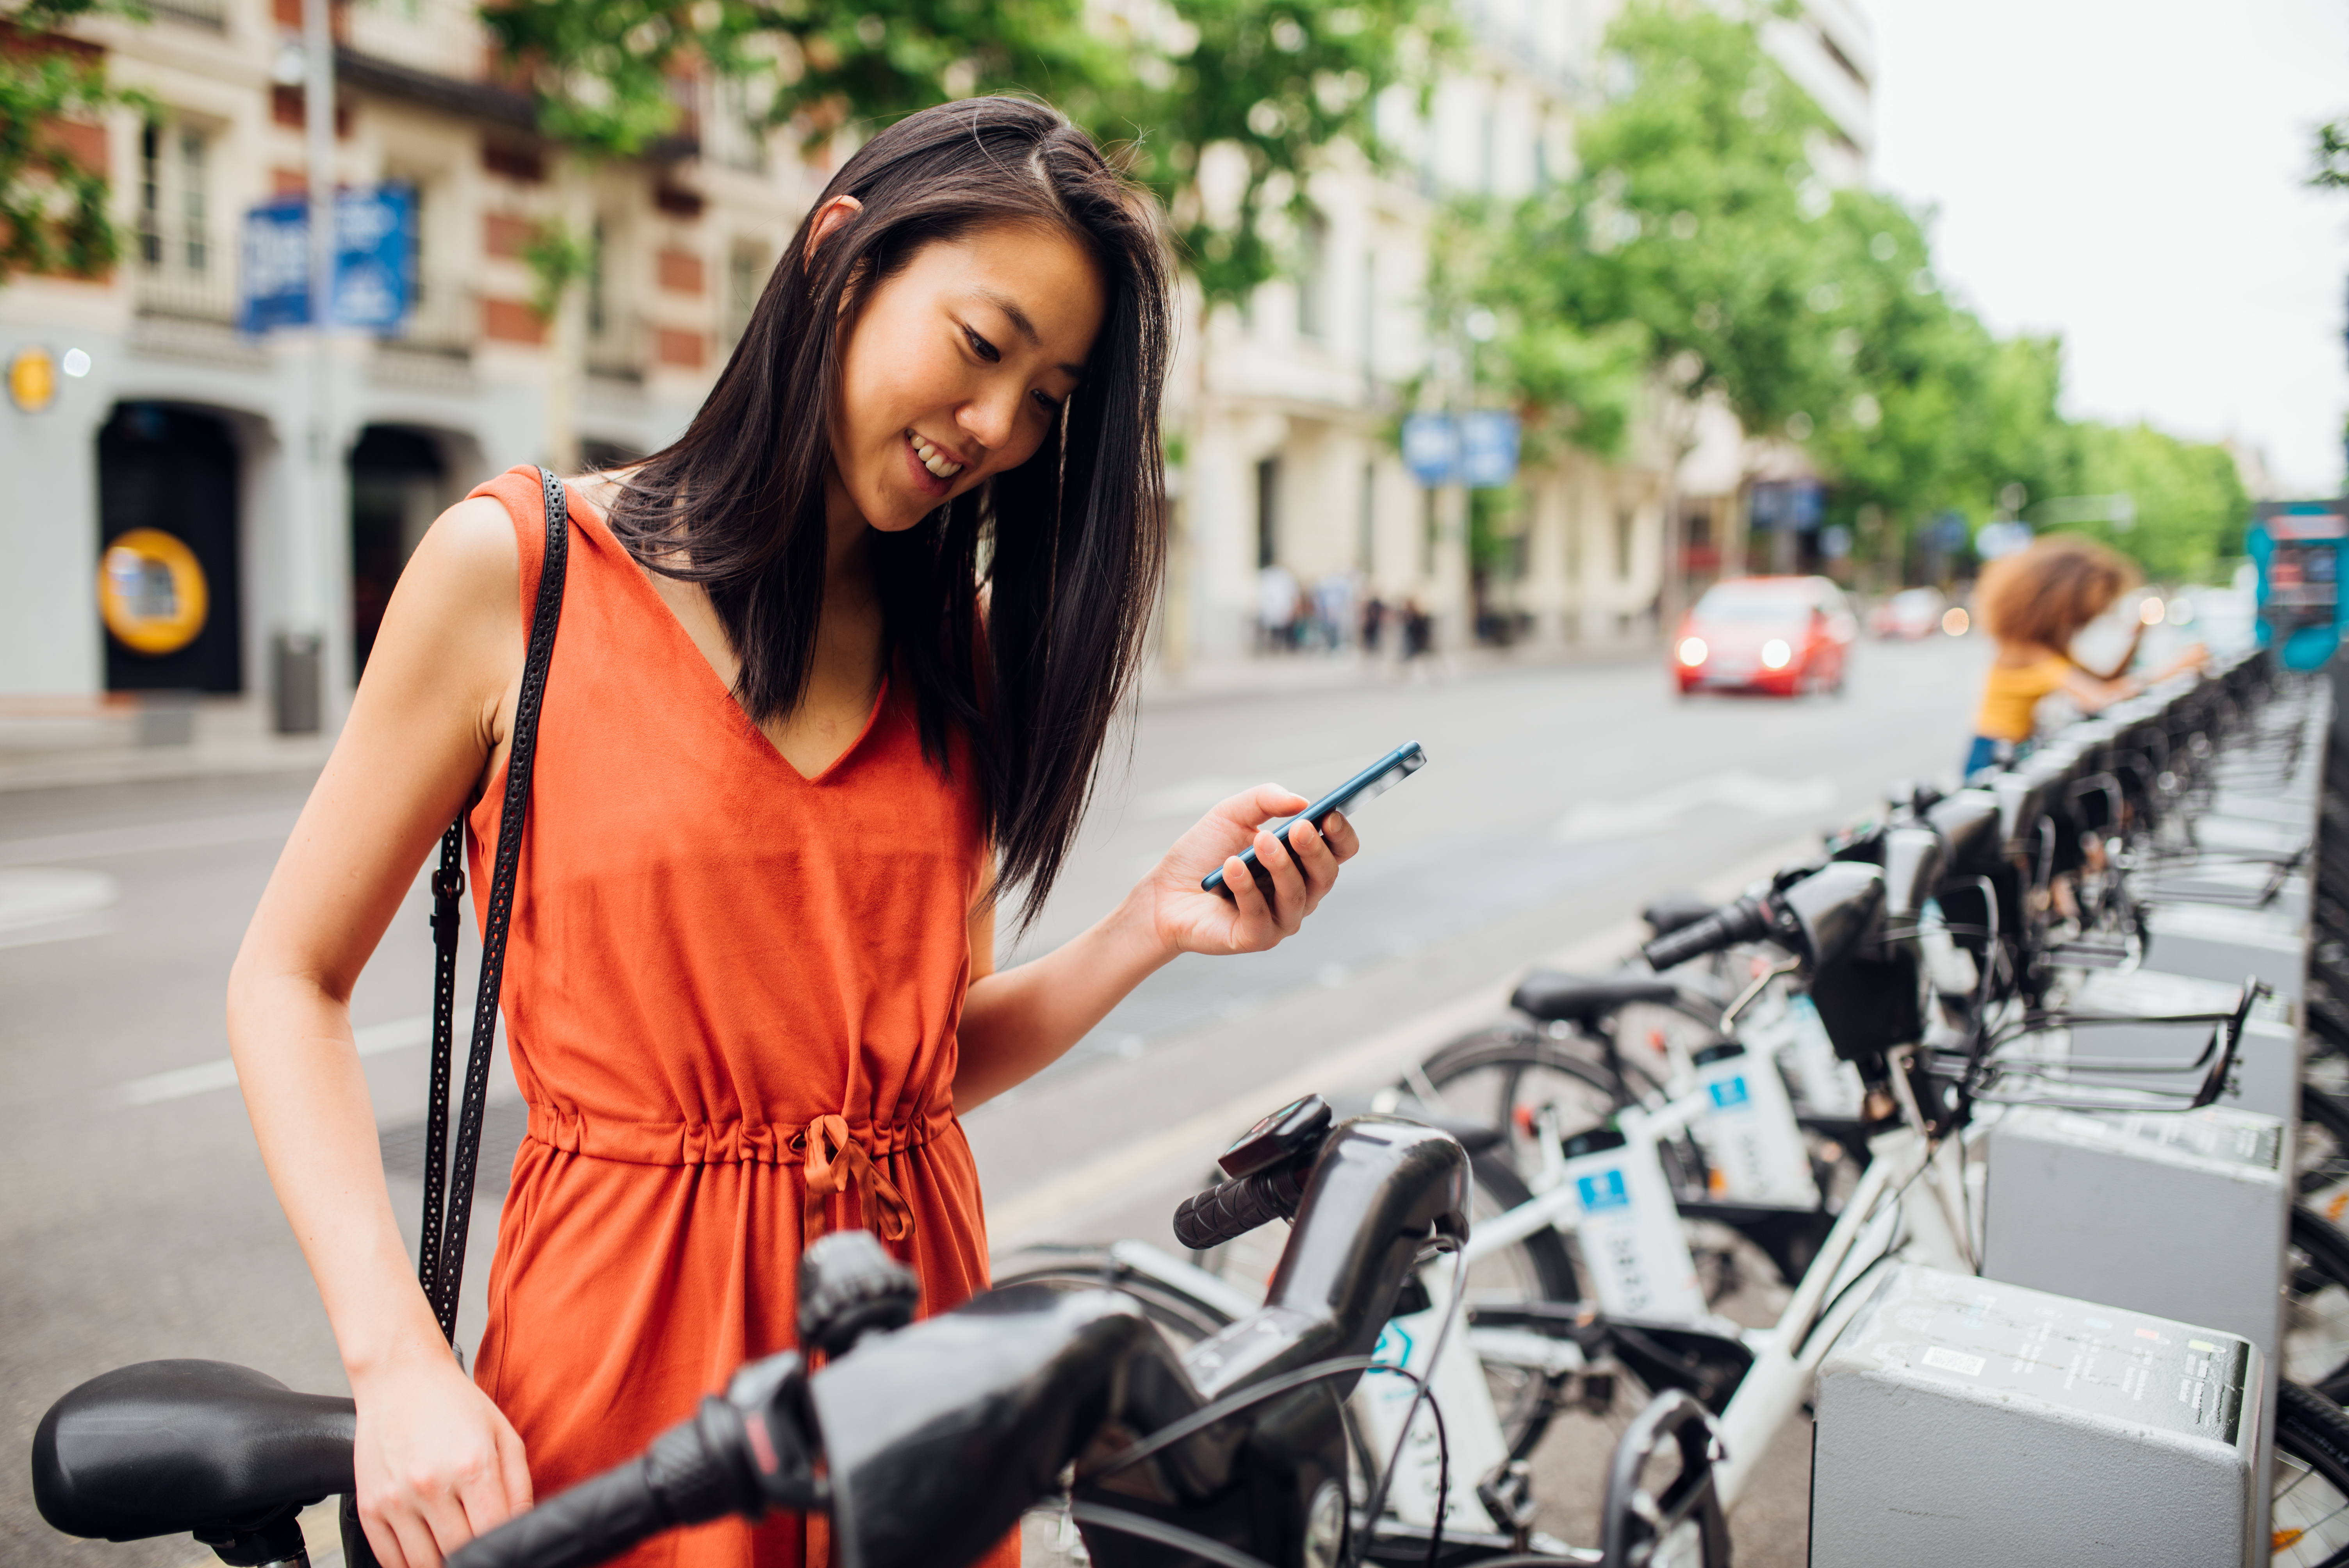 Person looking at phone while renting bikeshare